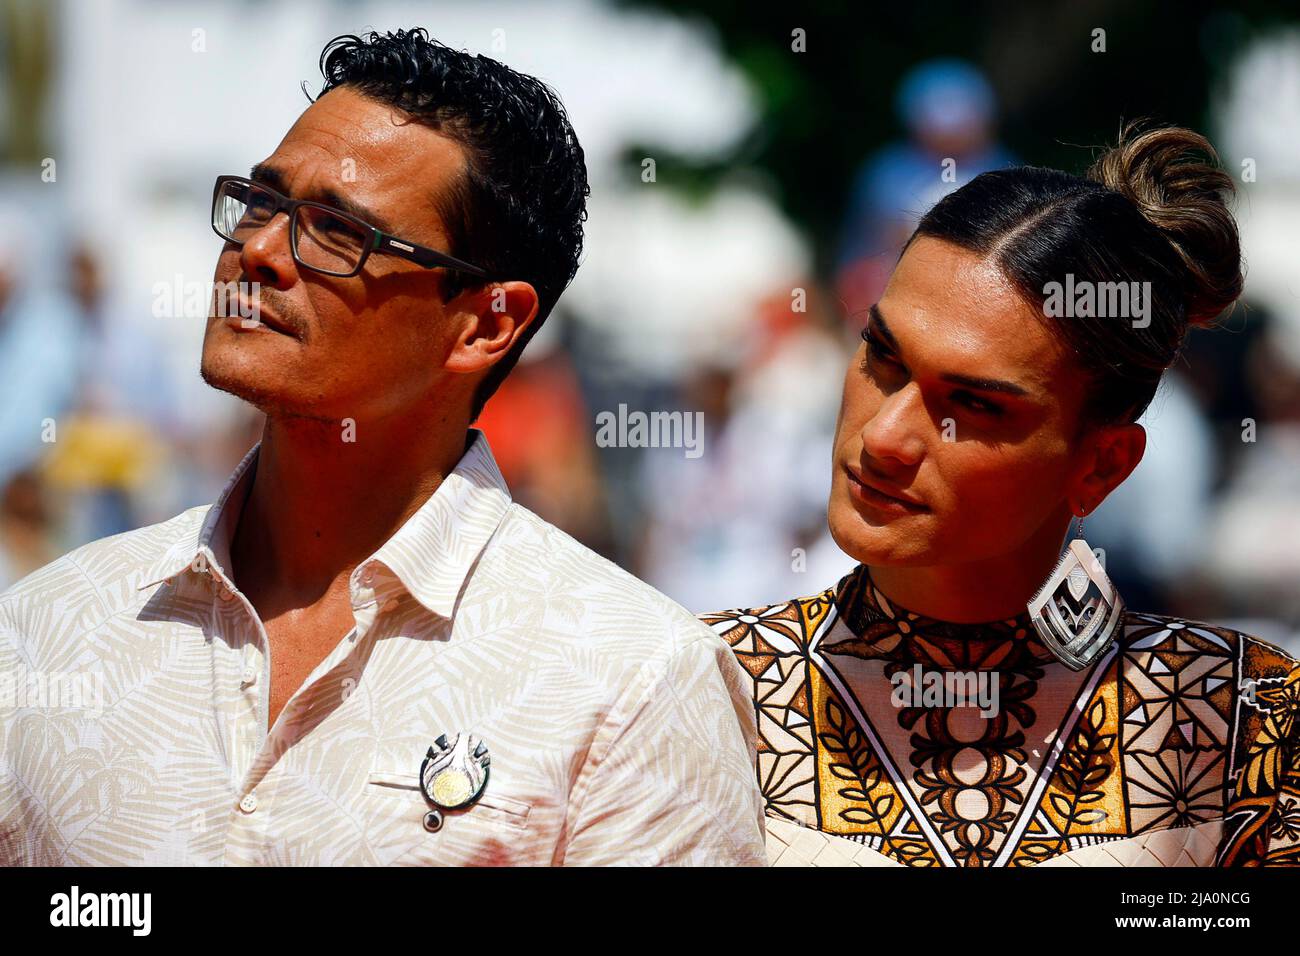 The 75th Cannes Film Festival - Screening of the film 'Tourment sur les iles' (Pacifiction) in competition - Red Carpet Arrivals - Cannes, France, May 26, 2022. Cast members Matahi Pambrun and Pahoa Mahagafanau pose. REUTERS/Stephane Mahe Stock Photo